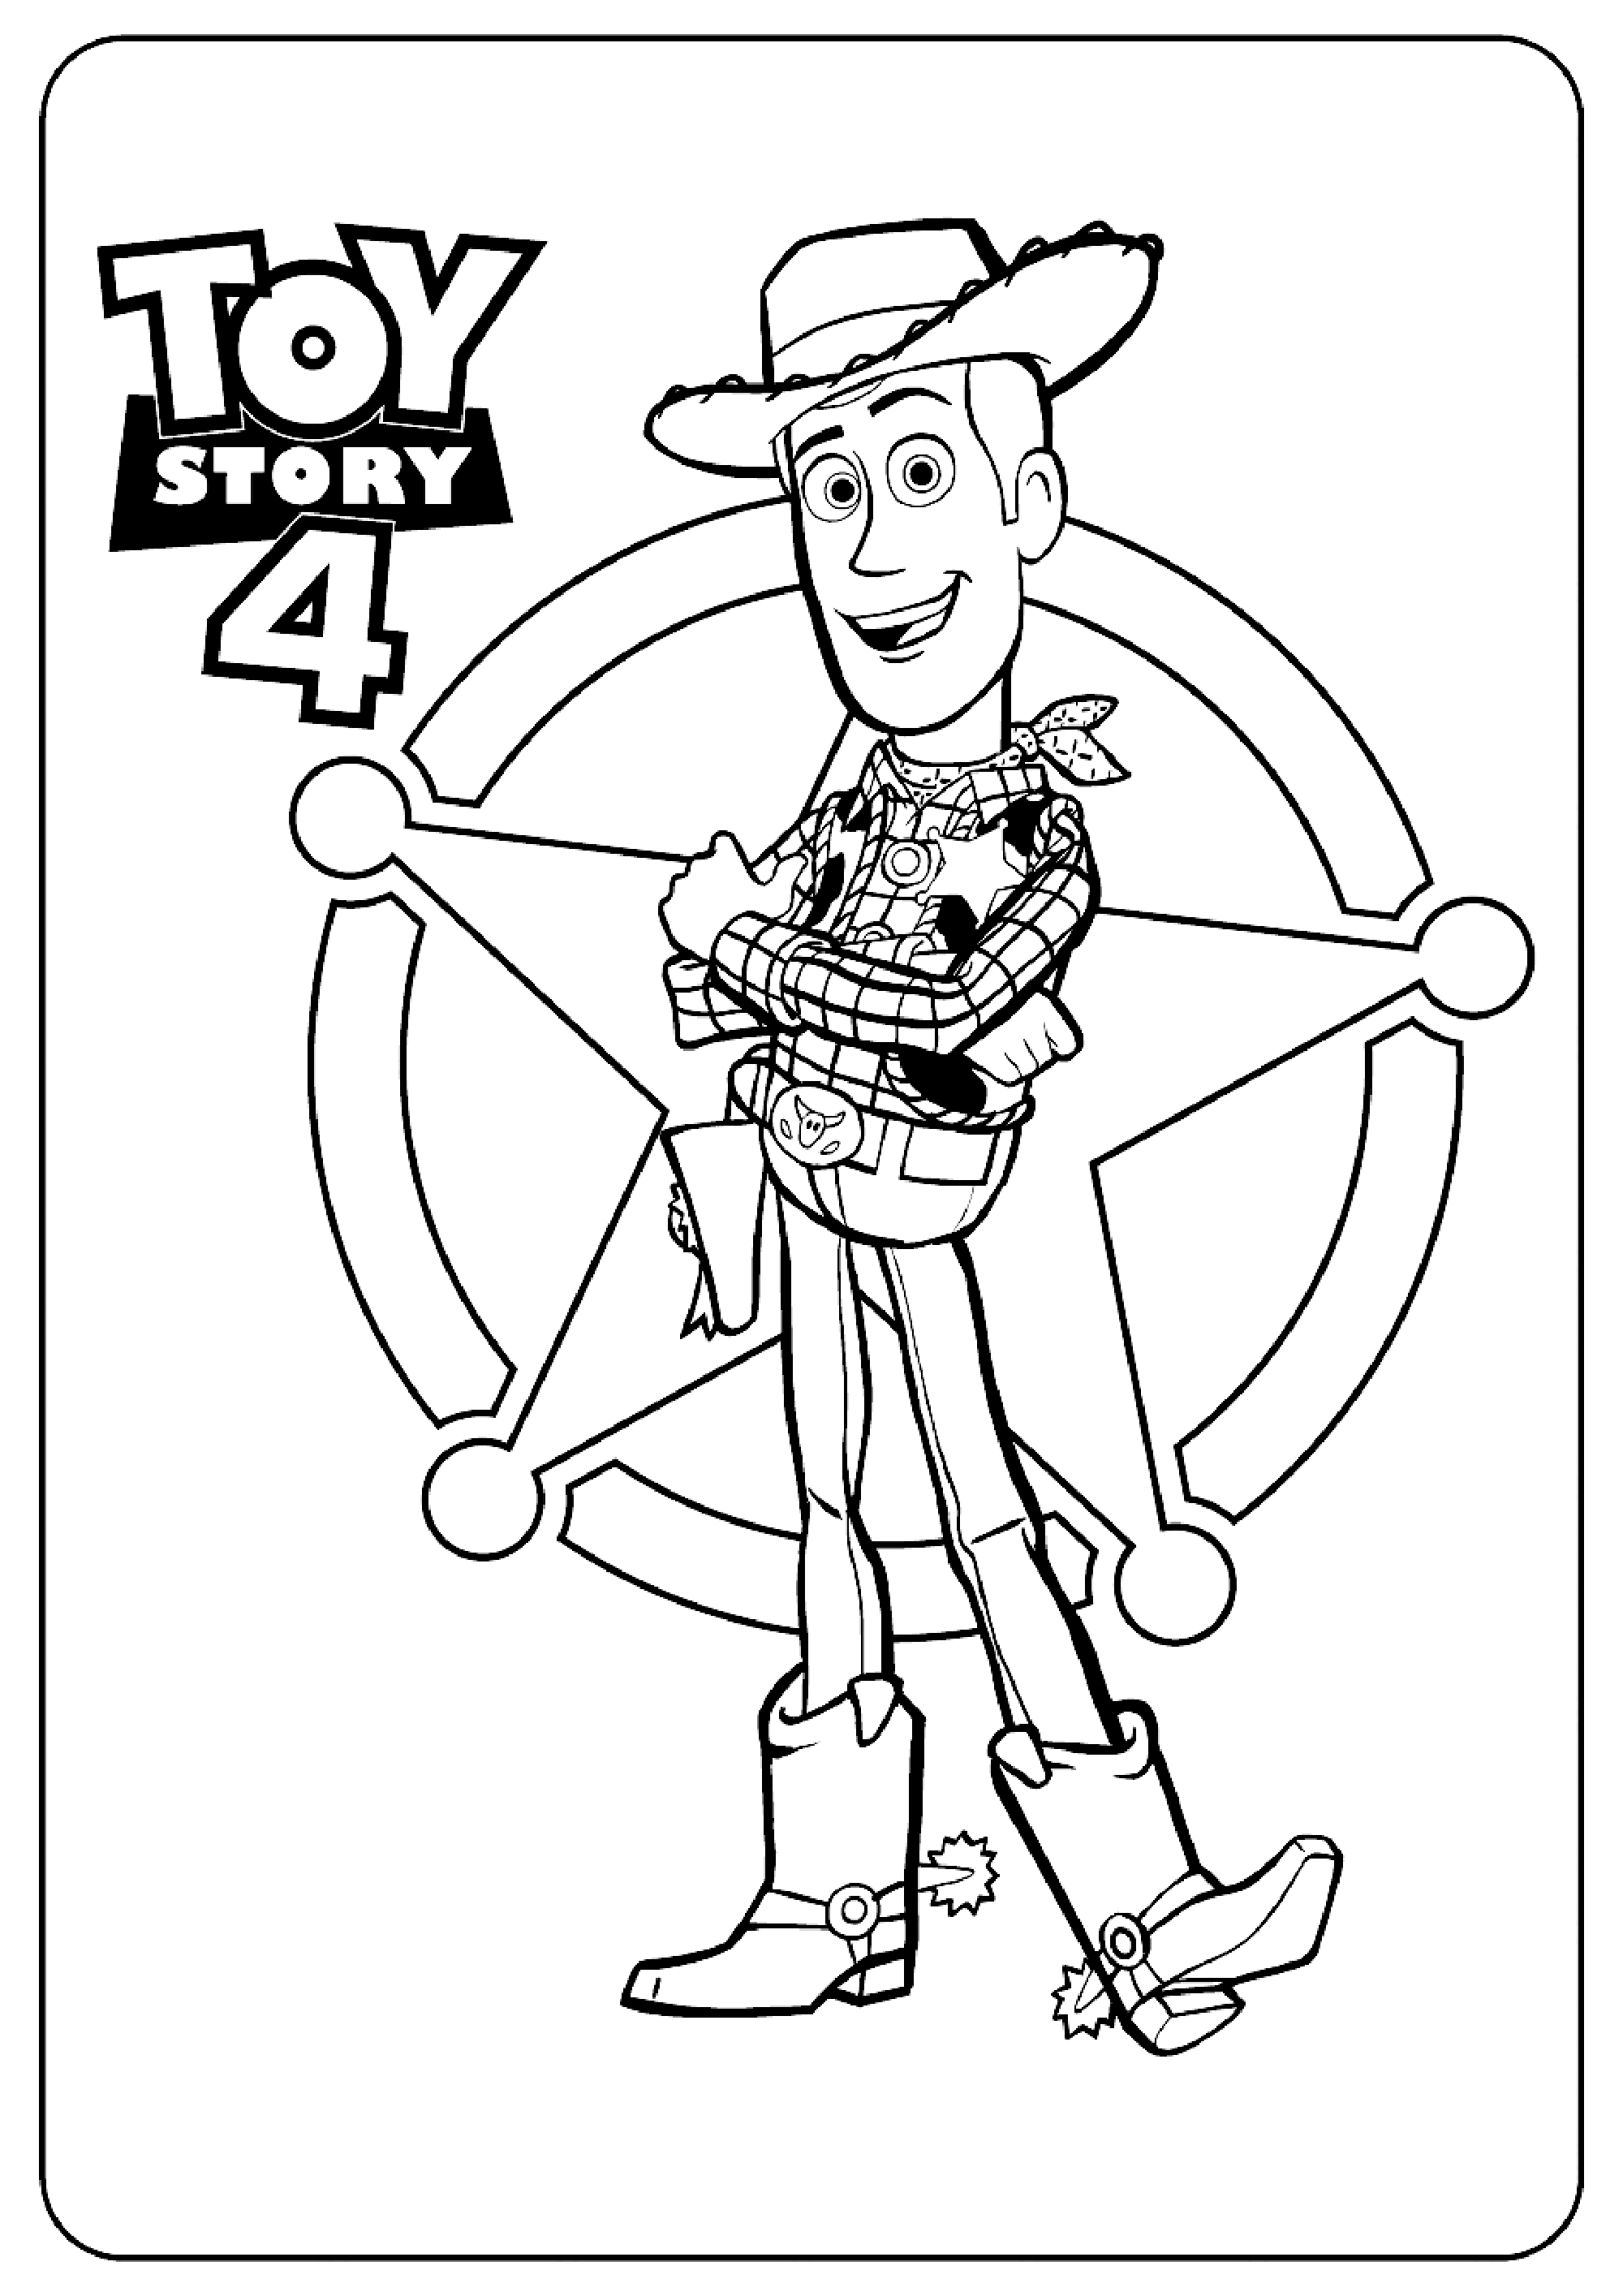 Woody : Toy Story 4 (Disney / pixar) coloring pages - Toy Story 4 Kids